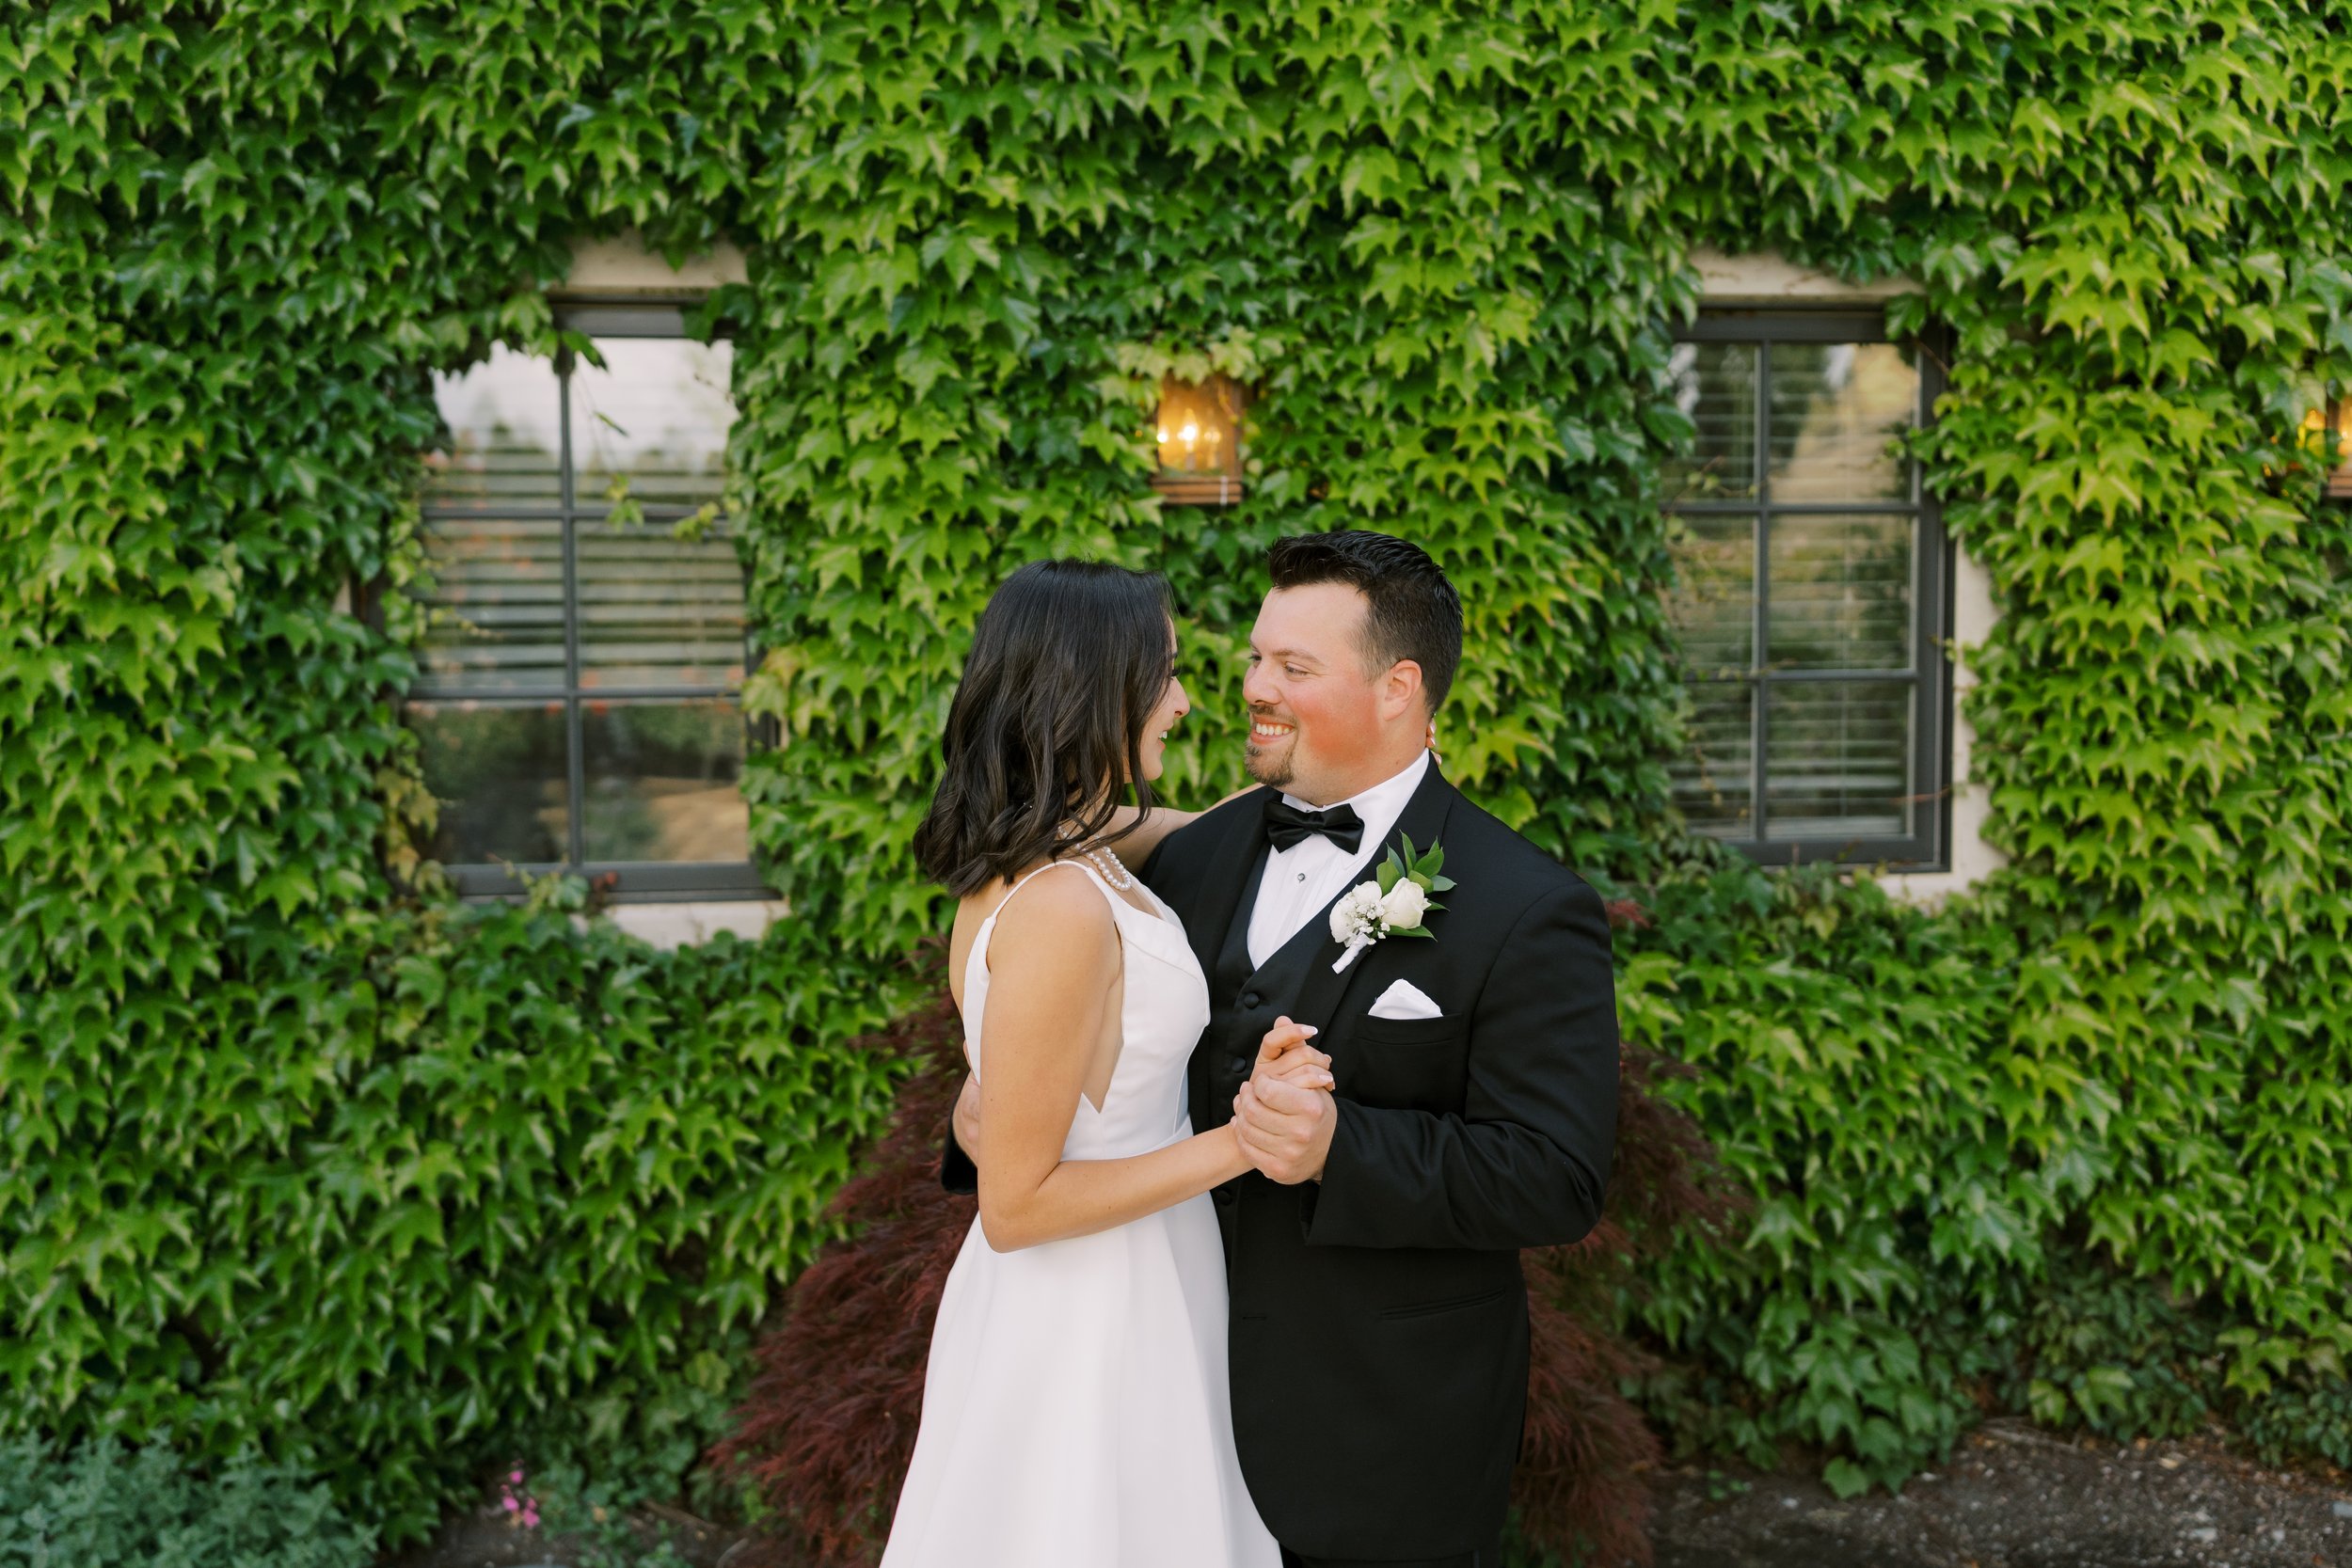 Clos LaChance Winery Wedding - Jacqueline & Colby-424.jpg